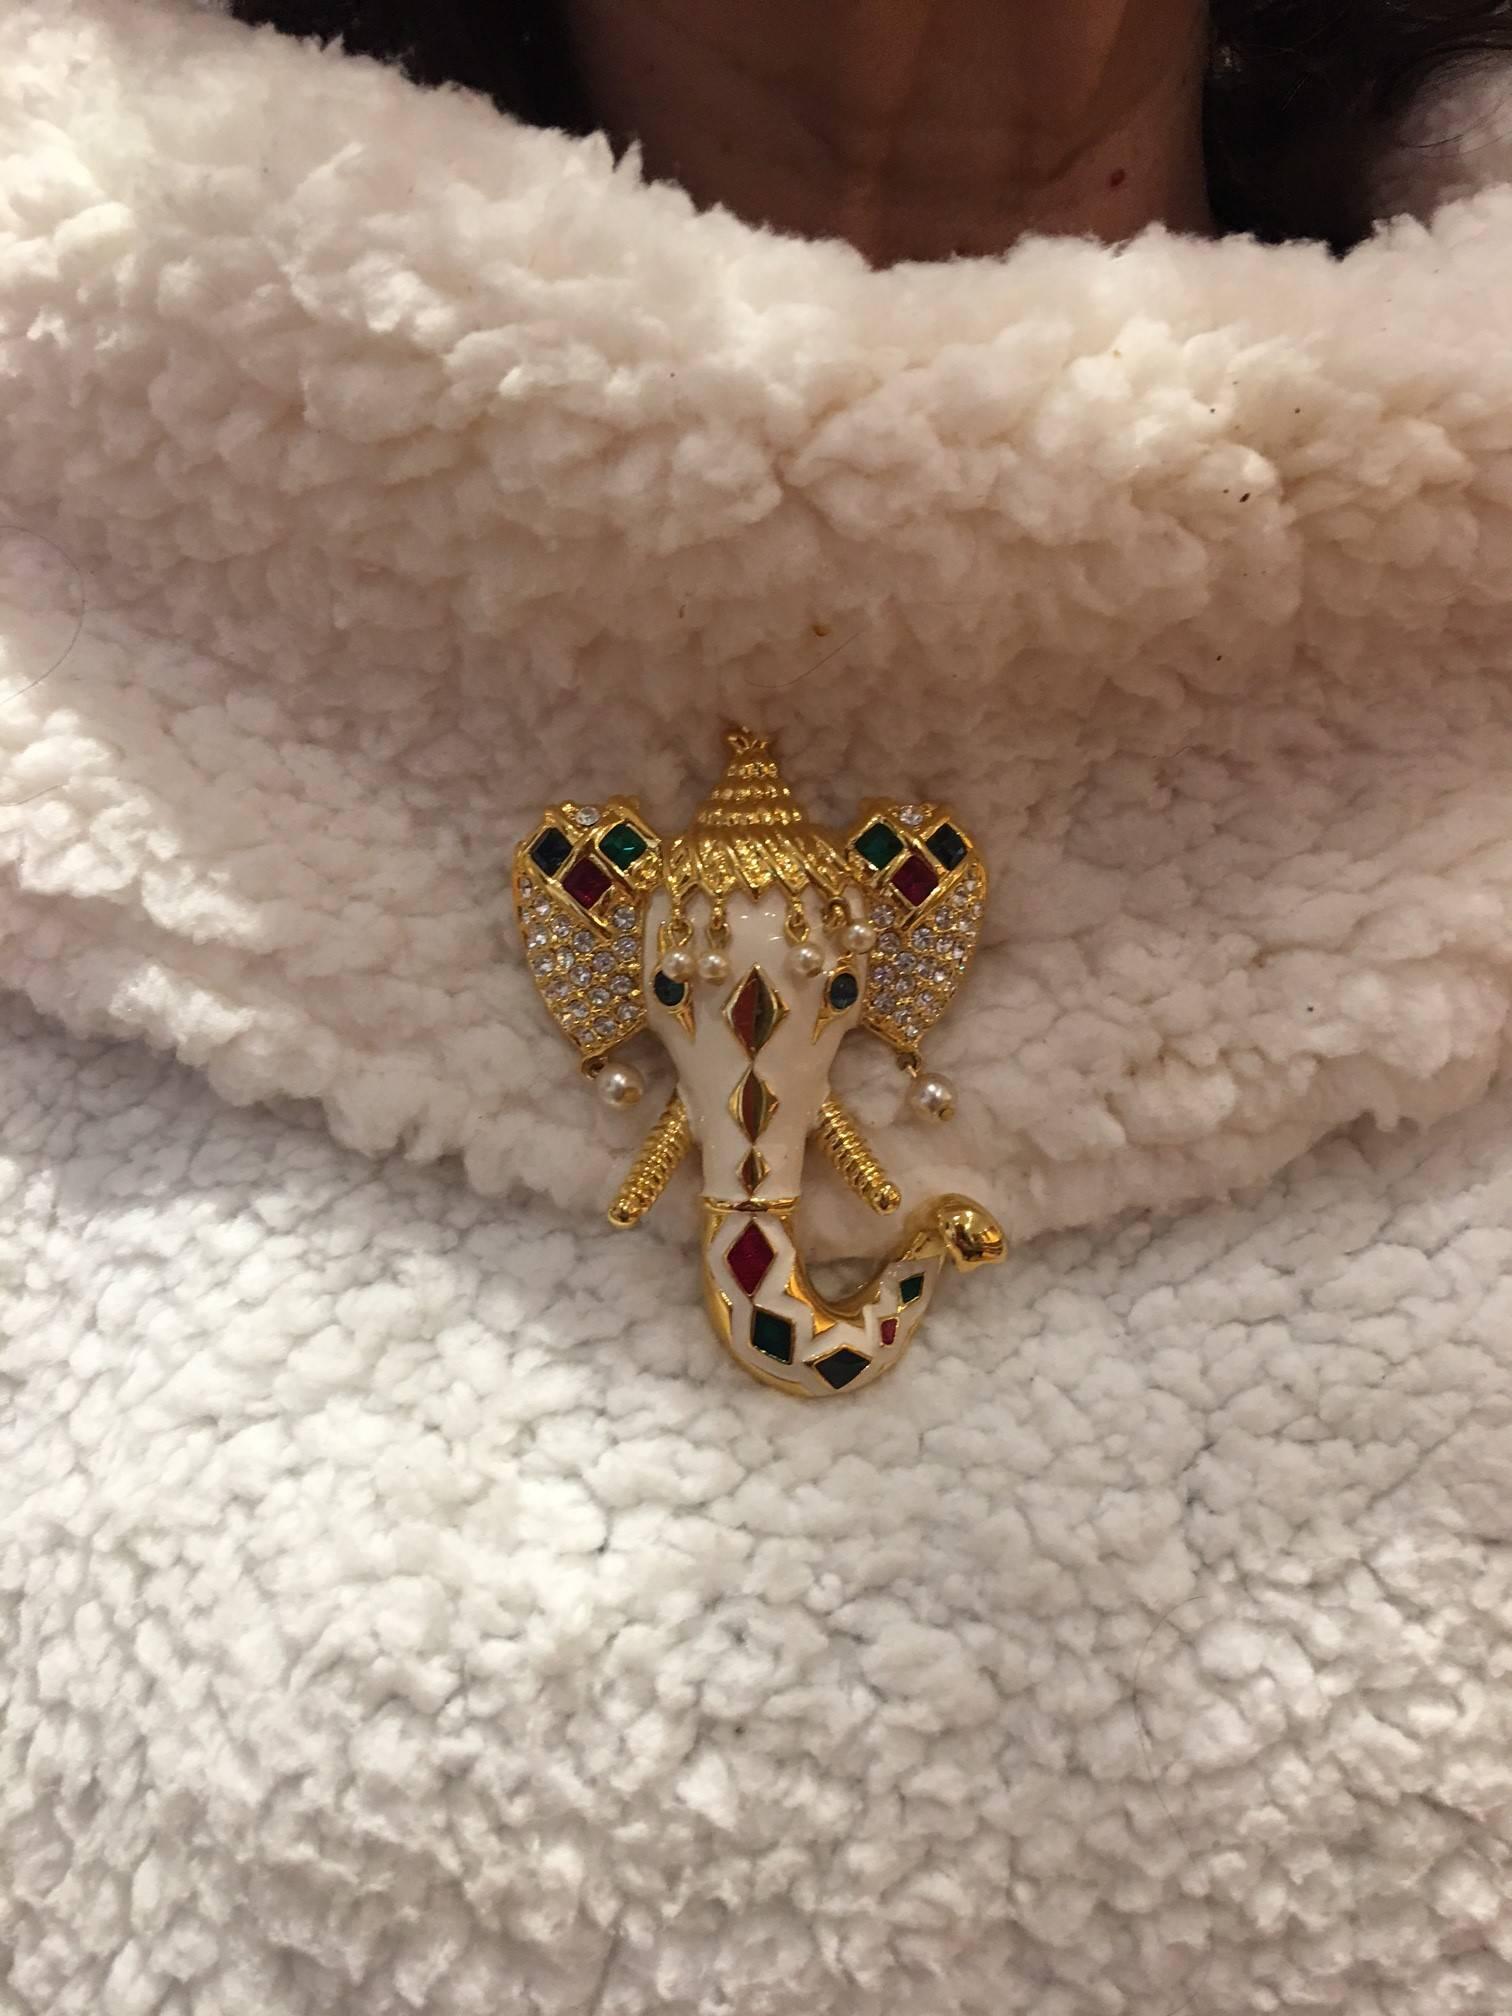 Fabulous Elephant head, all dressed up for ceremony, in cream enamel, Ruby red, Emerald green and Sapphire blue colored Enamel, square and cabochon faux Jewels, Rhinestones and gold tone accent, finished with dripping faux pearls; measuring approx.